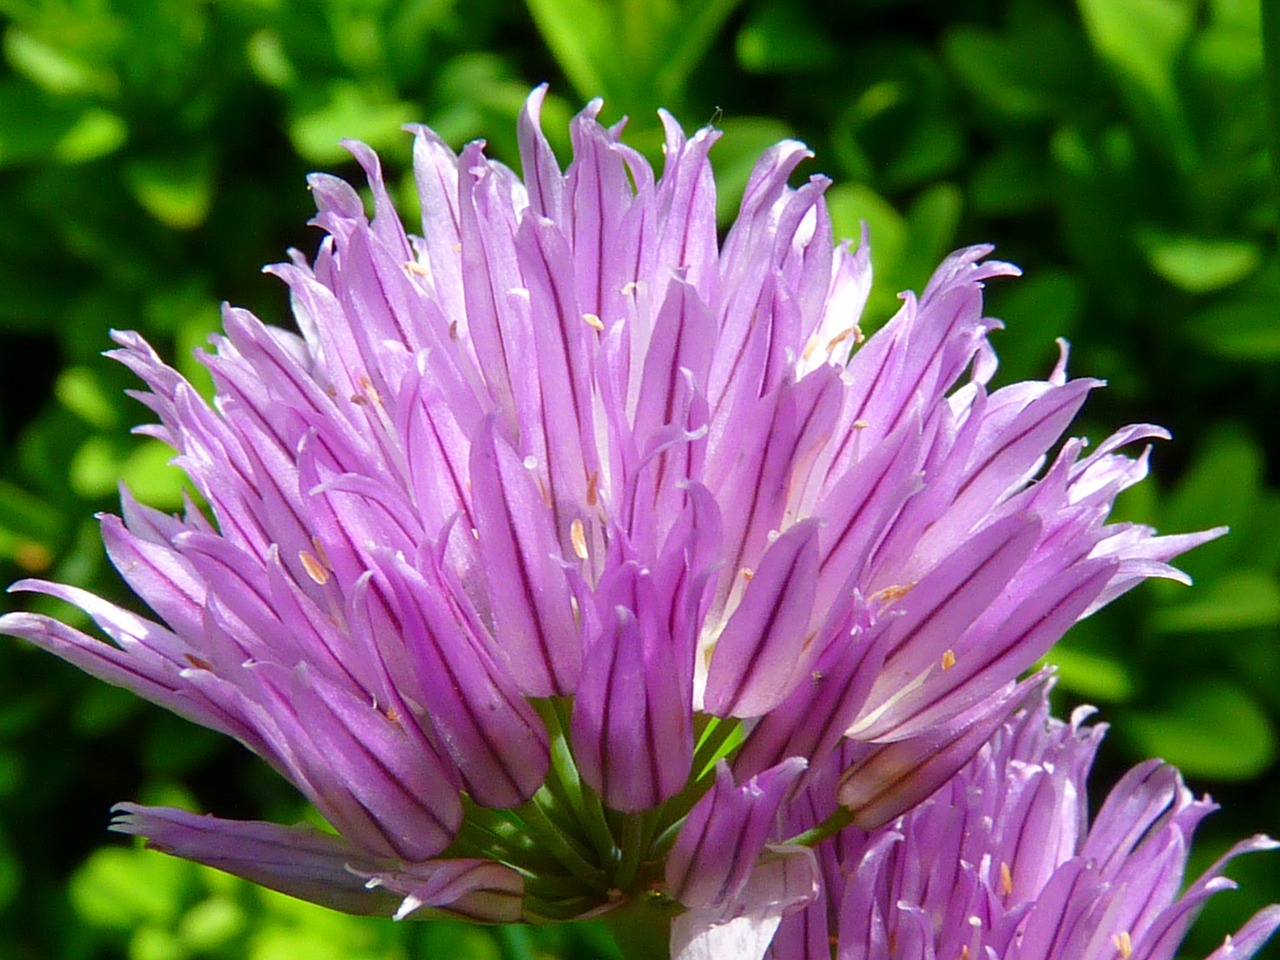 chives,blossom,bloom,herb limited,kitchen spice,purple,free pictures, free photos, free images, royalty free, free illustrations, public domain